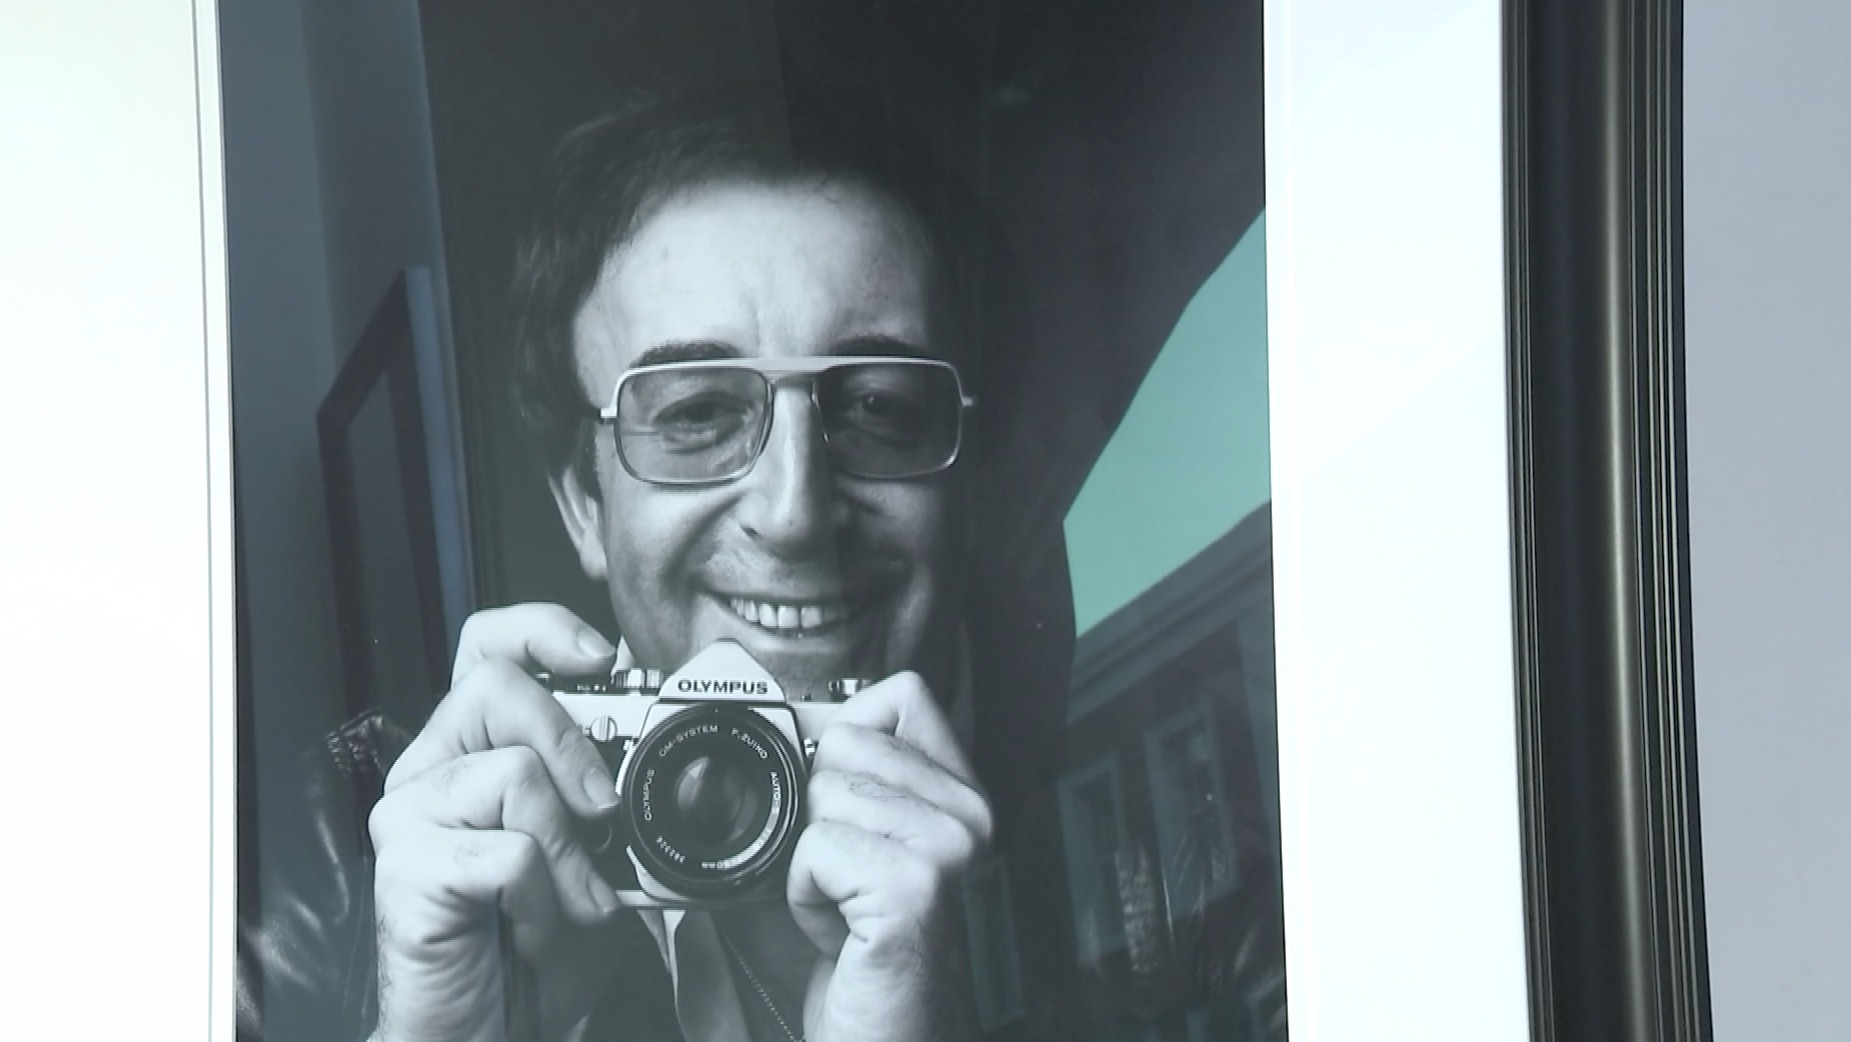 Peter Sellers photos auctioned off for heart charity | ITV News